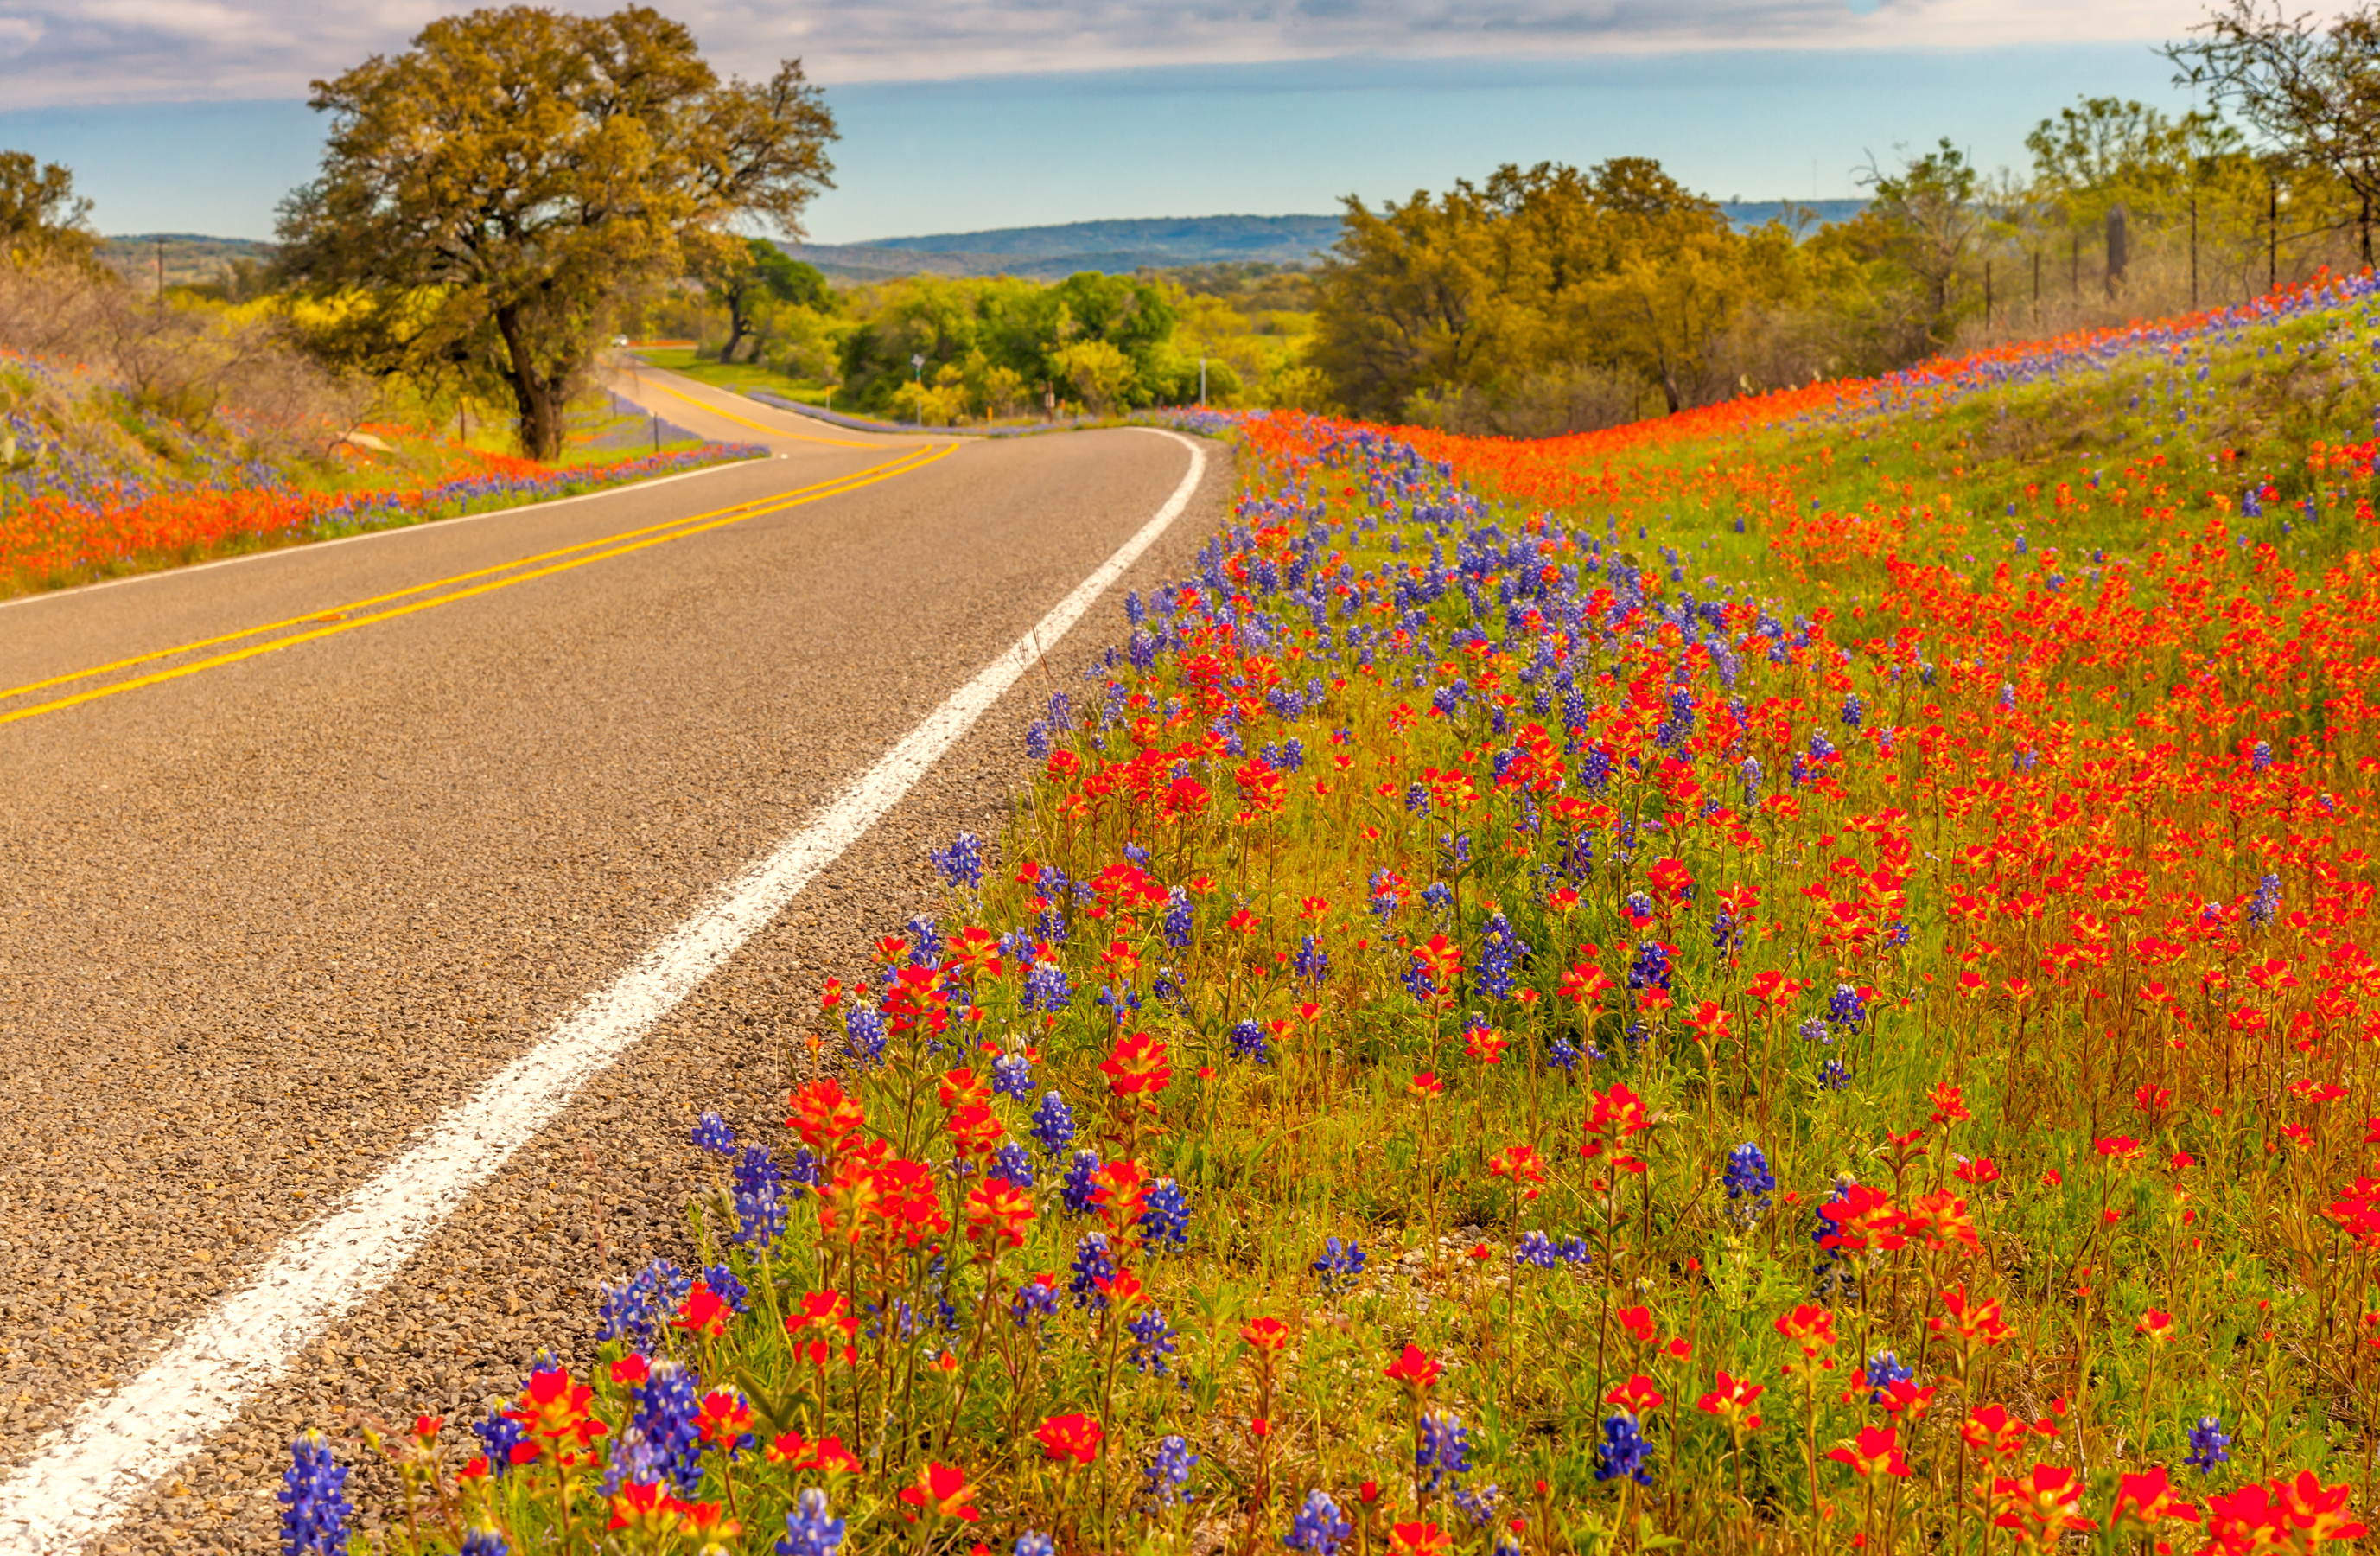  Road  in Spring  HD Wallpaper  Background  Image 2754x1800 